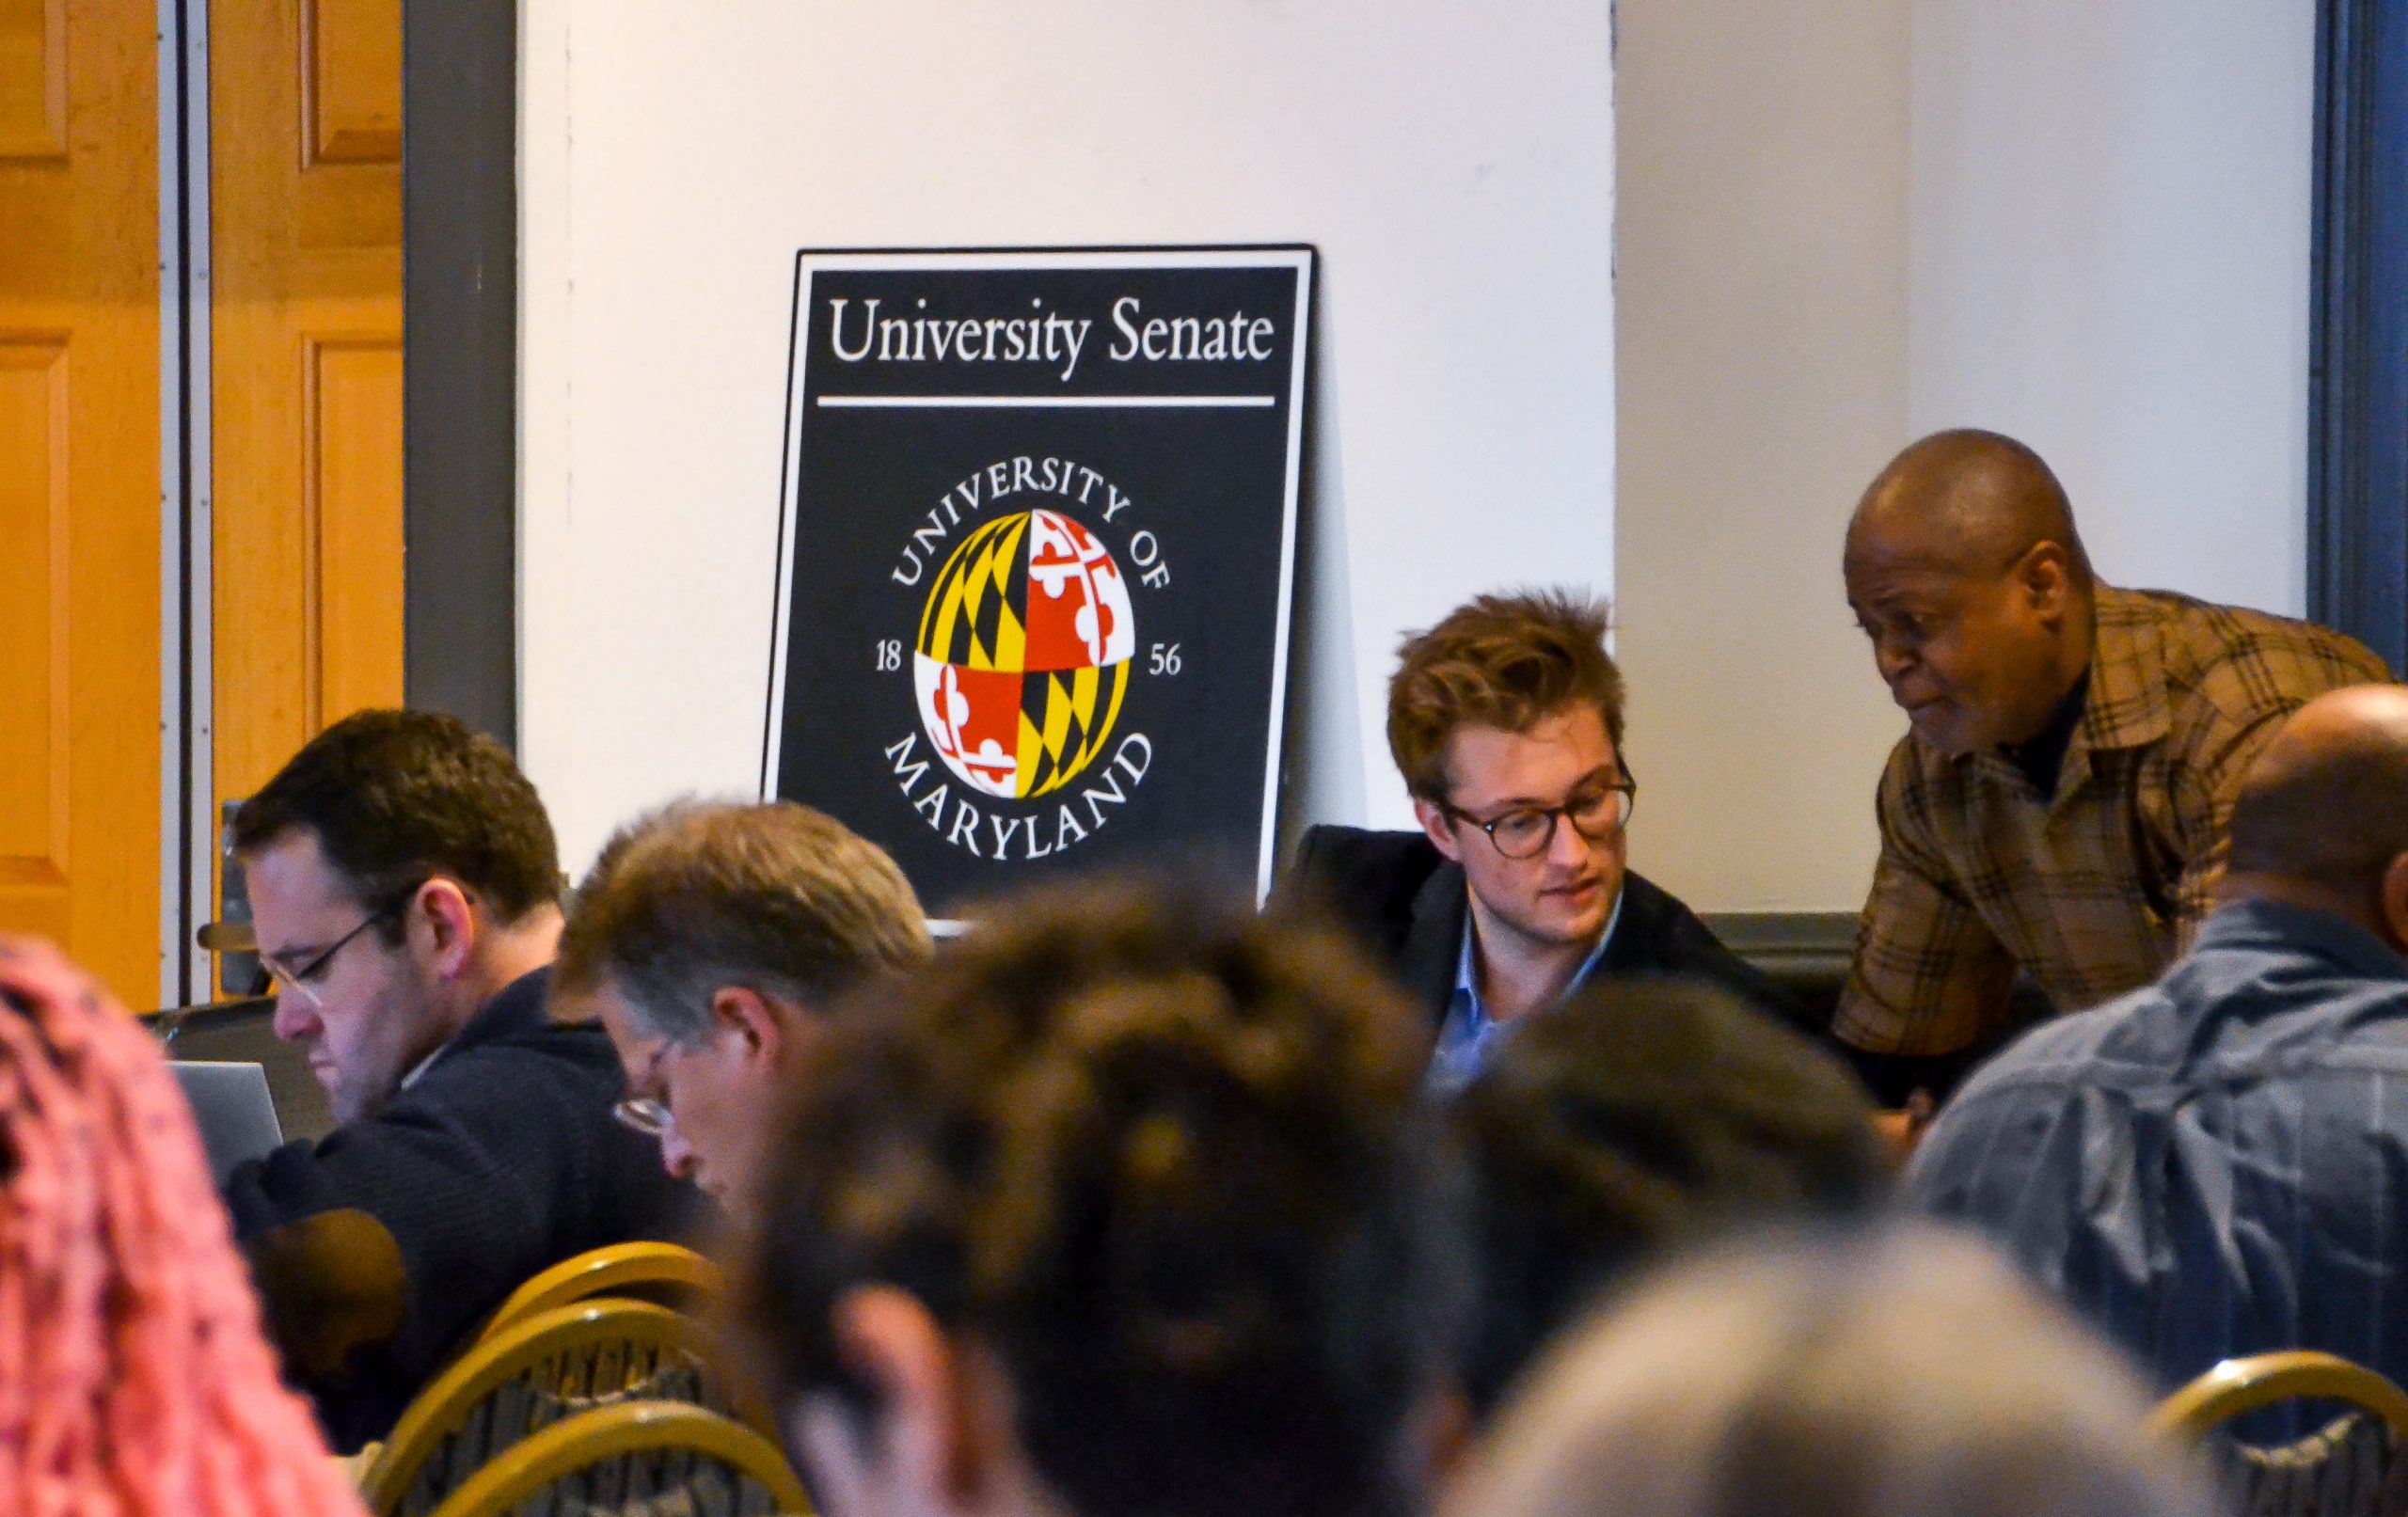 University Senate continues discussions on changing UMD final exam policy